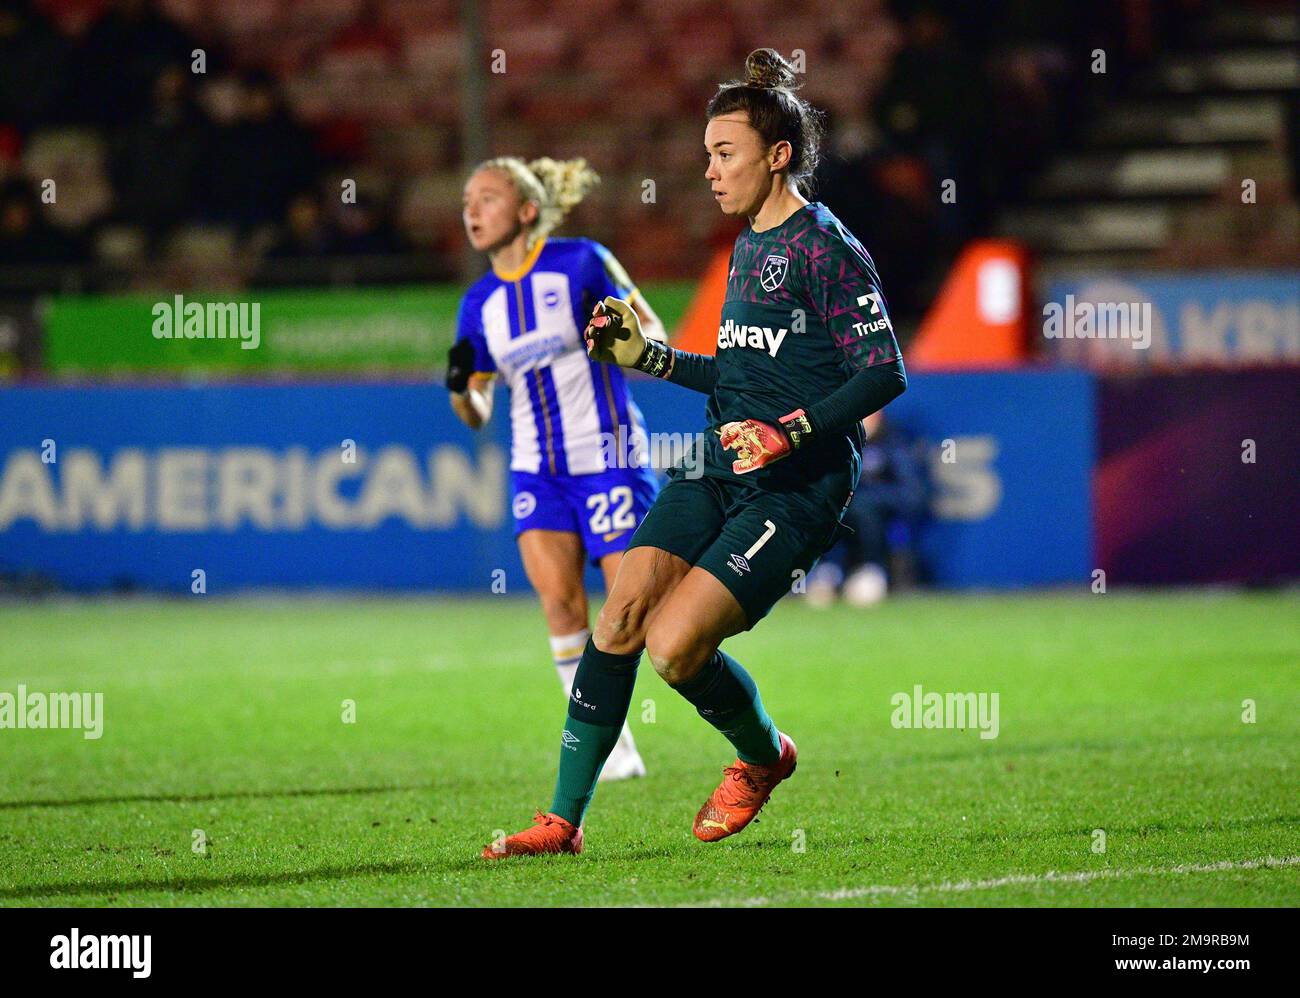 Crawley, UK. 18th Jan, 2023. Mackenzie Arnold Goalkeeper of West Ham United clears her lines during the FA Women's League Cup Group C match between Brighton & Hove Albion Women and West Ham United Ladies at The People's Pension Stadium on January 18th 2023 in Crawley, United Kingdom. (Photo by Jeff Mood/phcimages.com) Credit: PHC Images/Alamy Live News Stock Photo